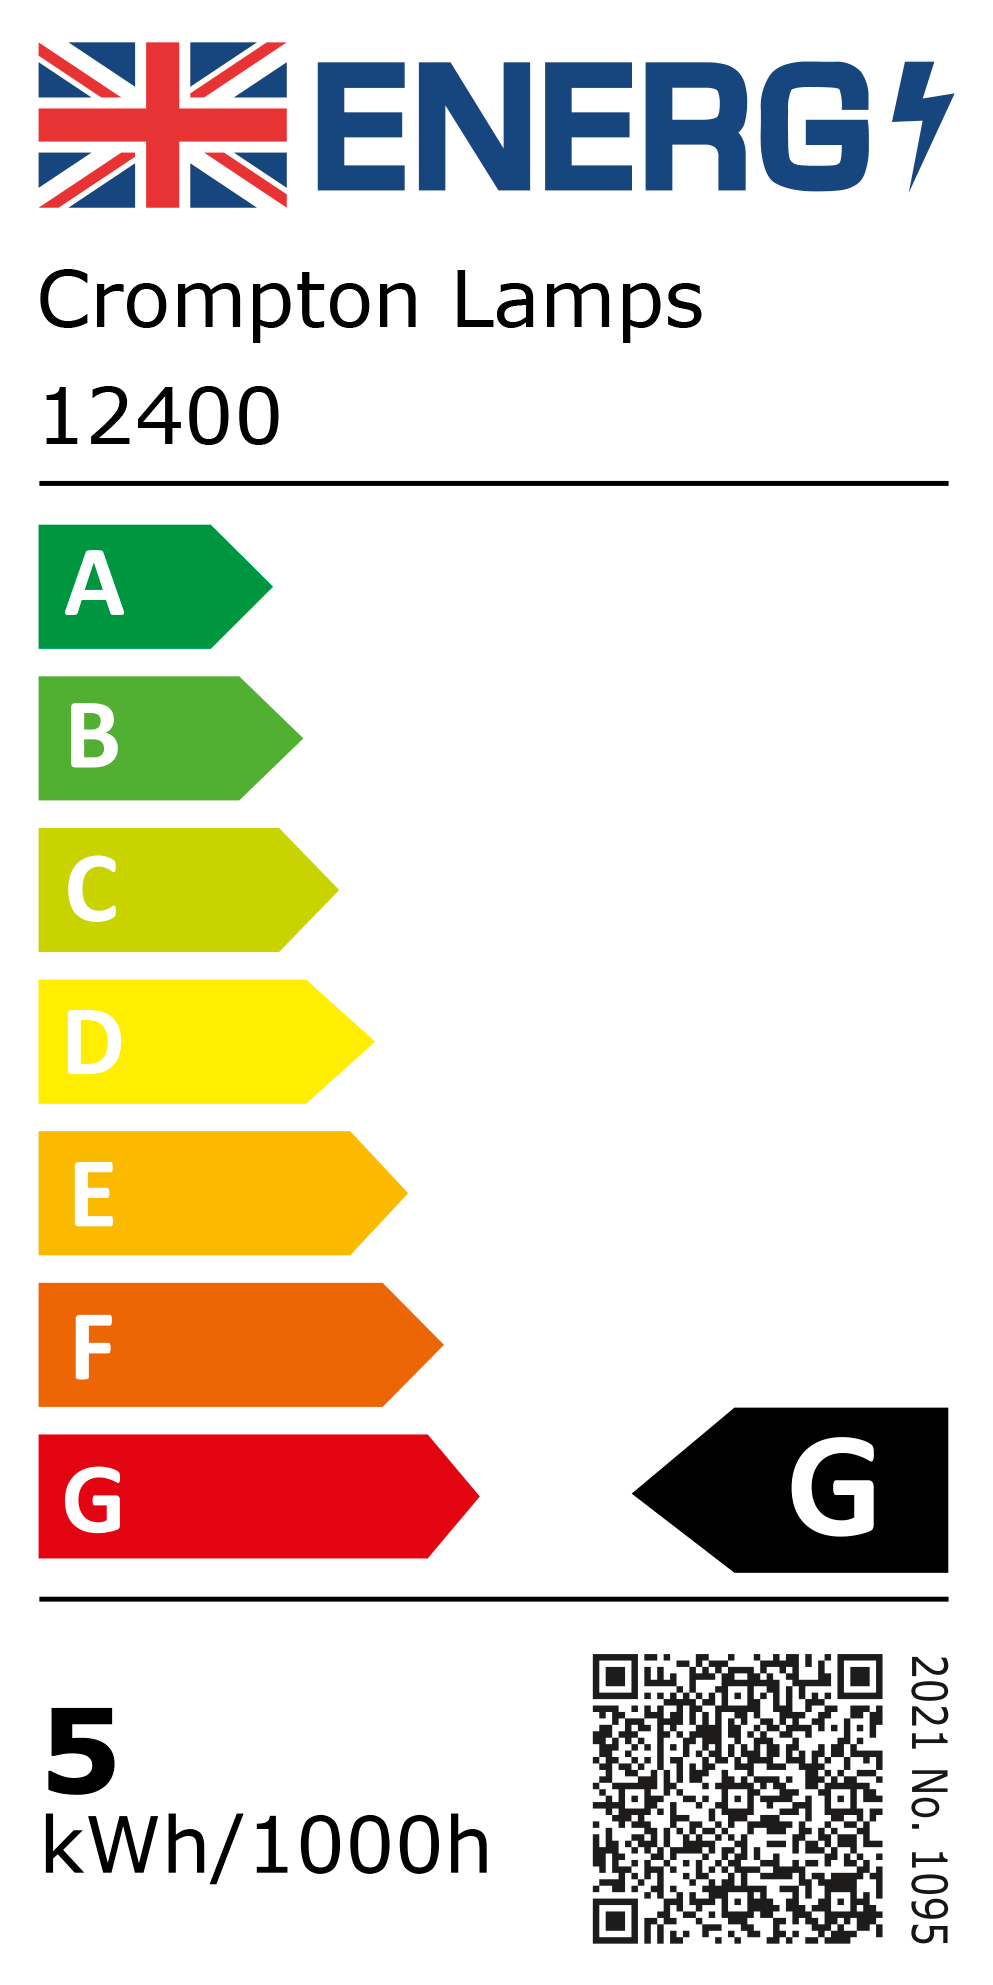 New 2021 Energy Rating Label: Stock Code 12400